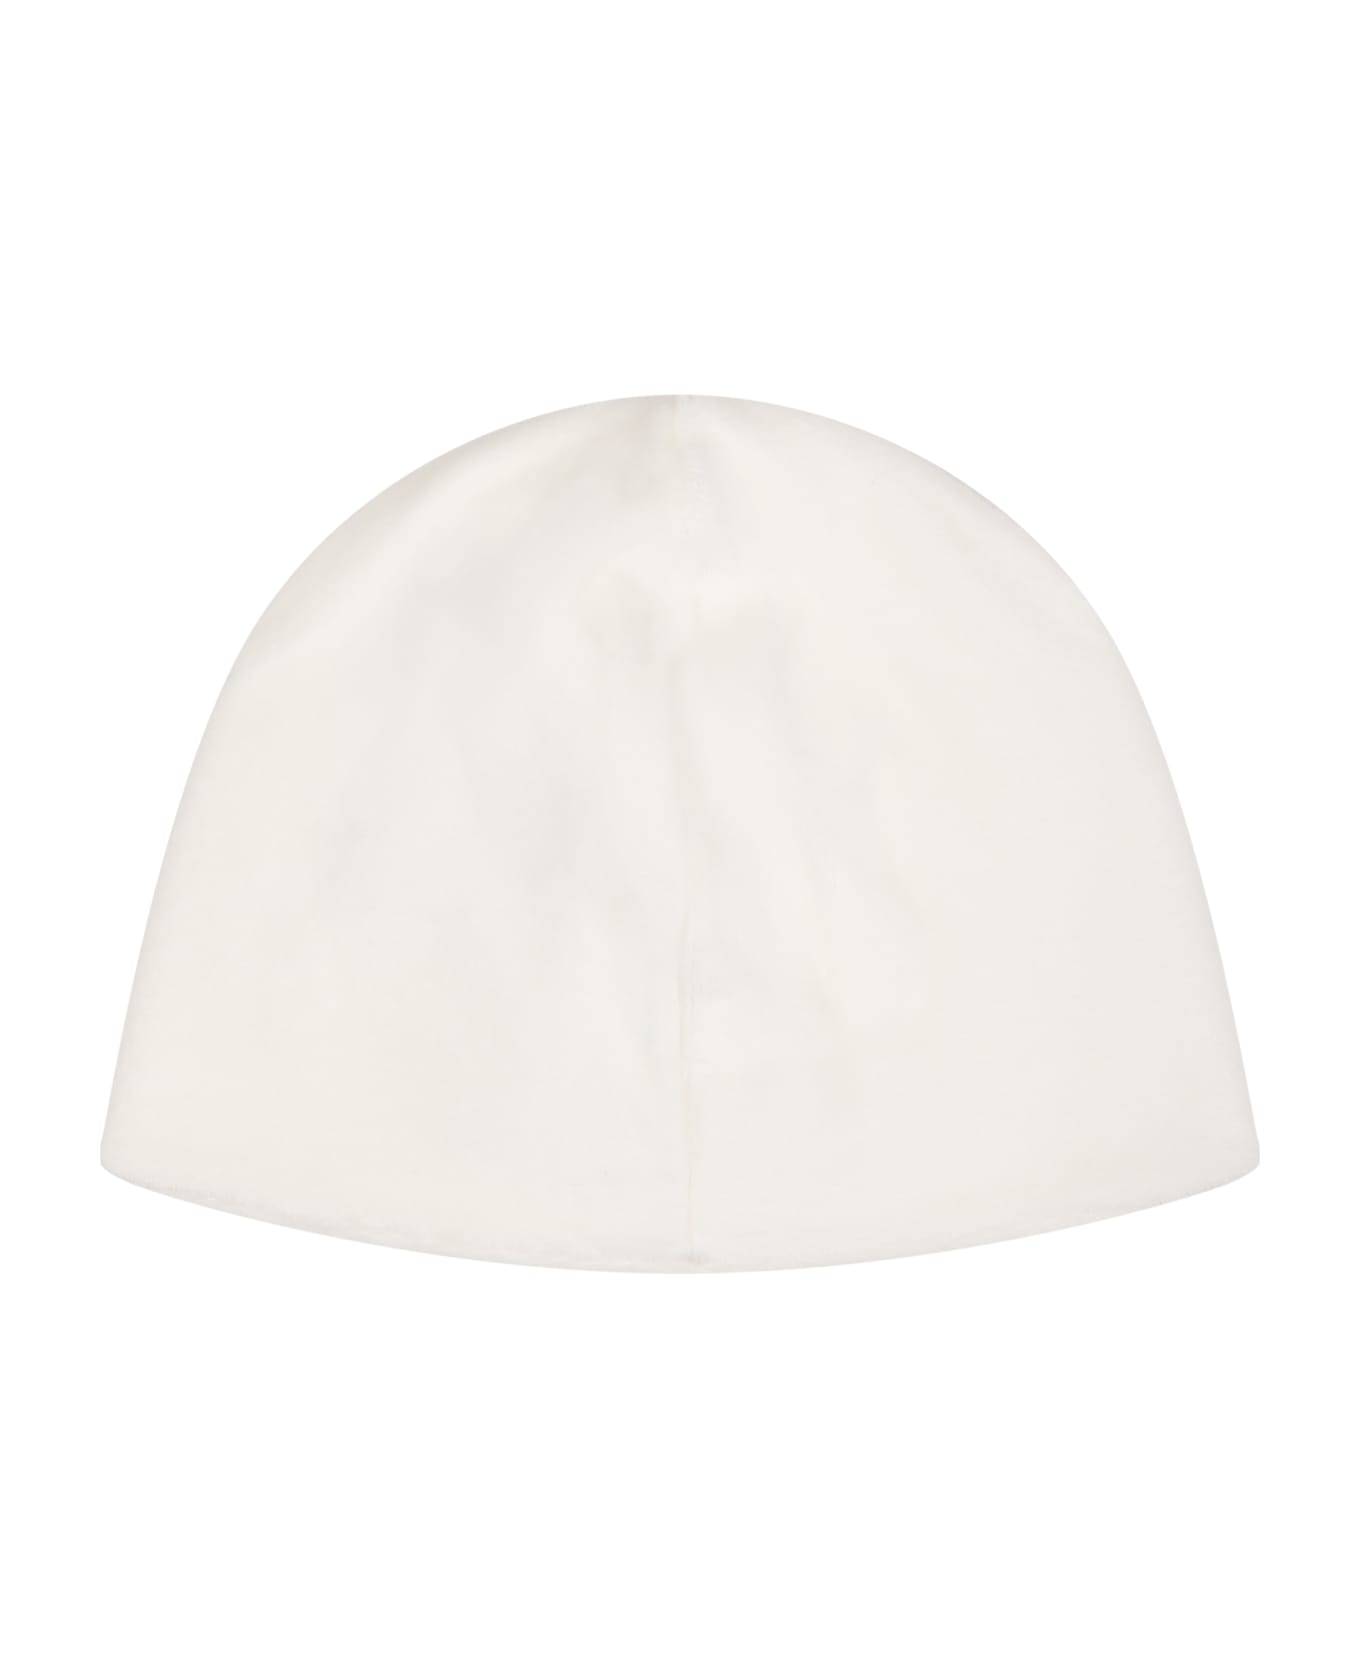 La stupenderia White Hat For Baby Girl With Heart - White